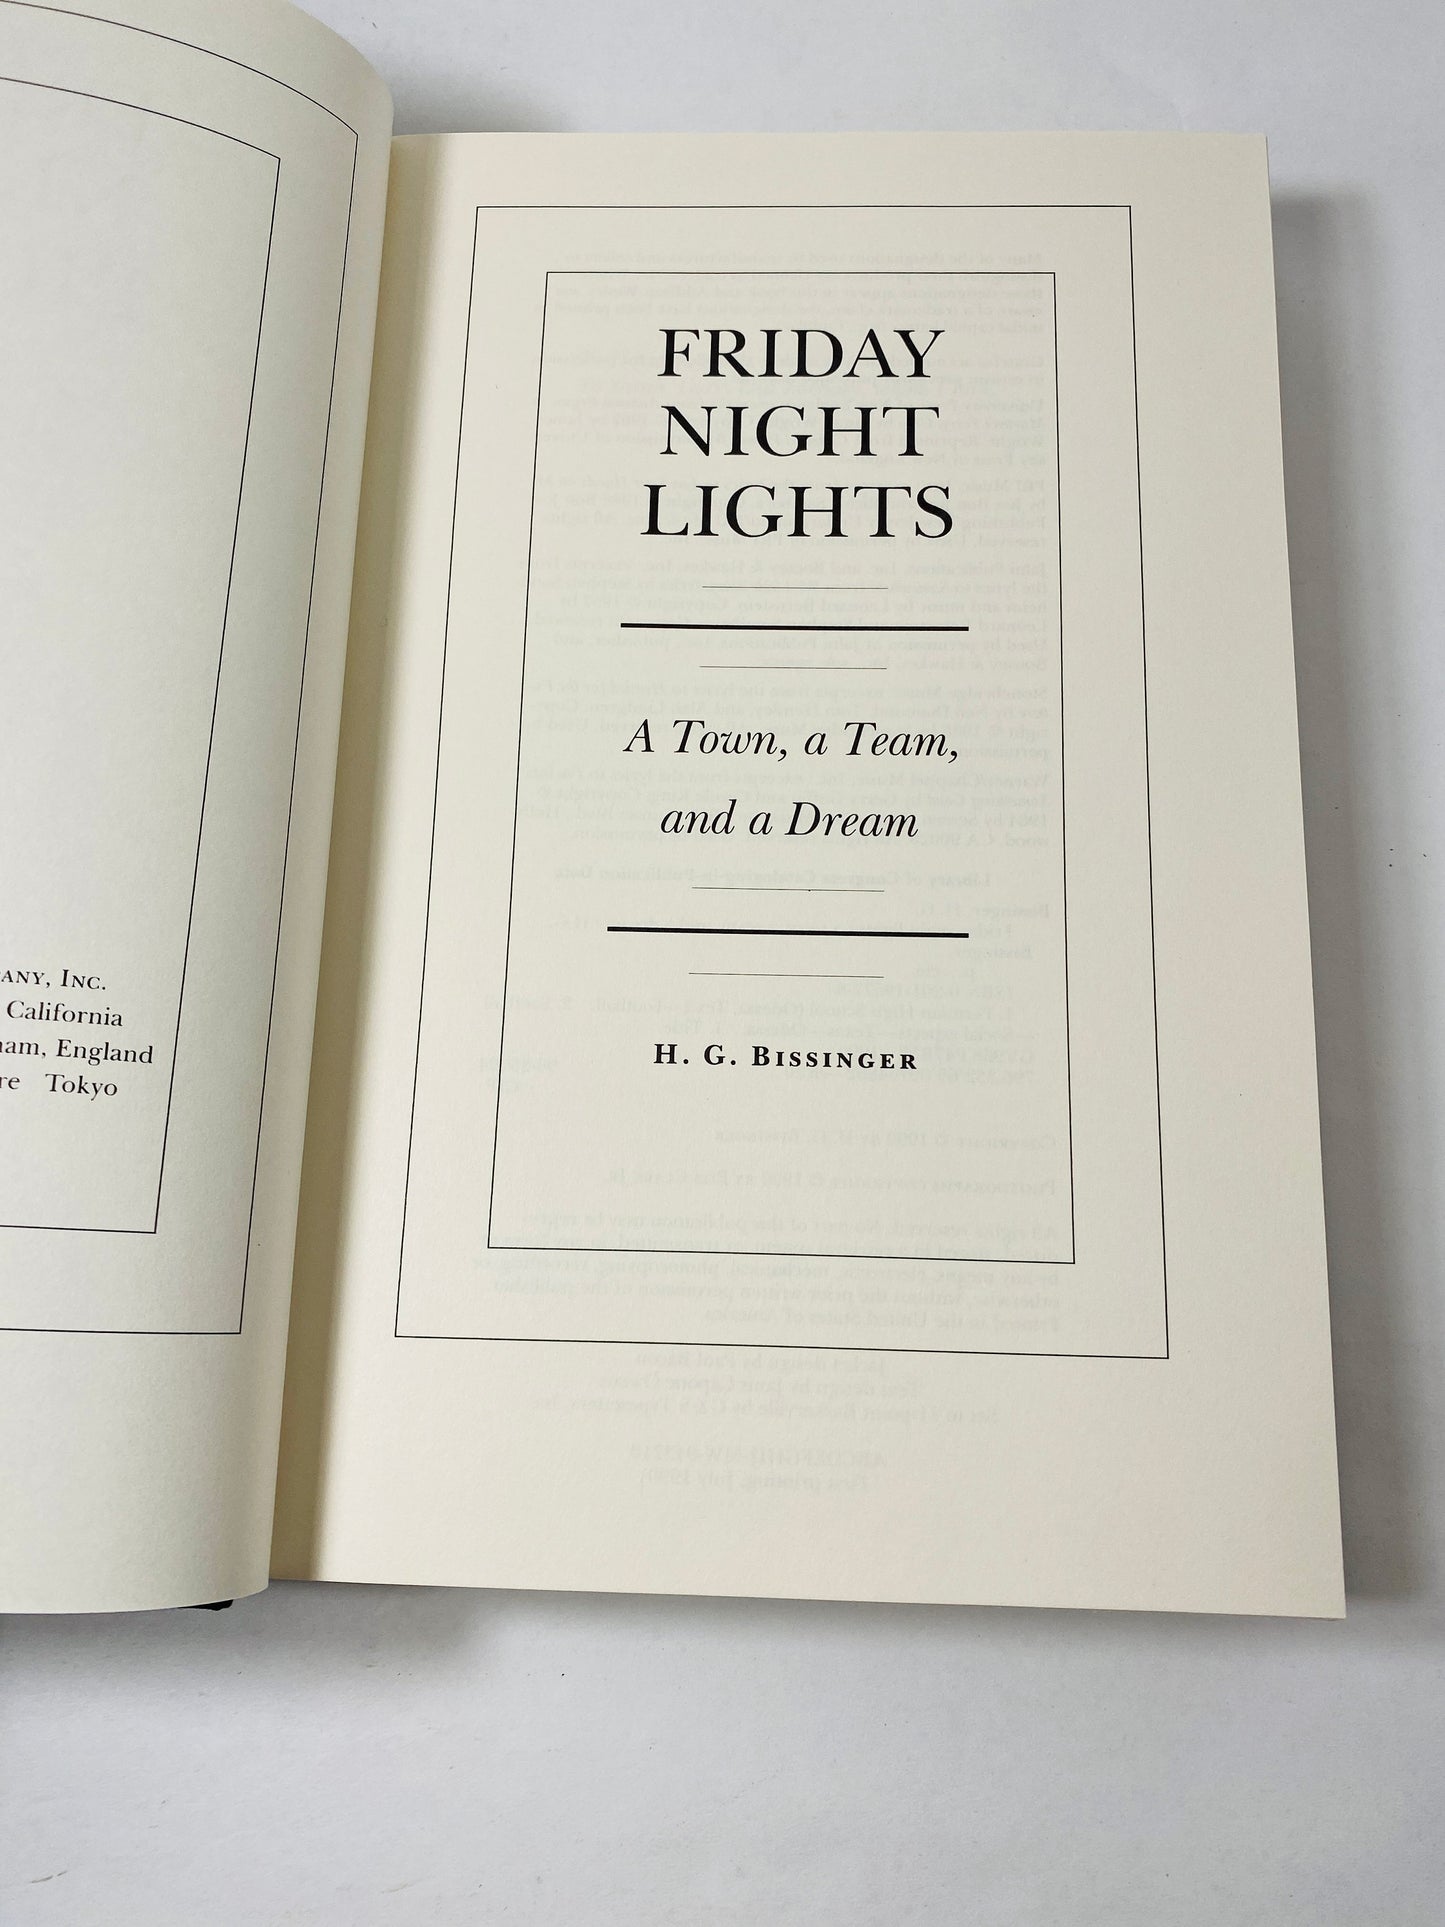 Friday Night Lights by HG Bissinger First printing vintage book A Town, a Team and a Dream. Football black book decor. Texas sports gift